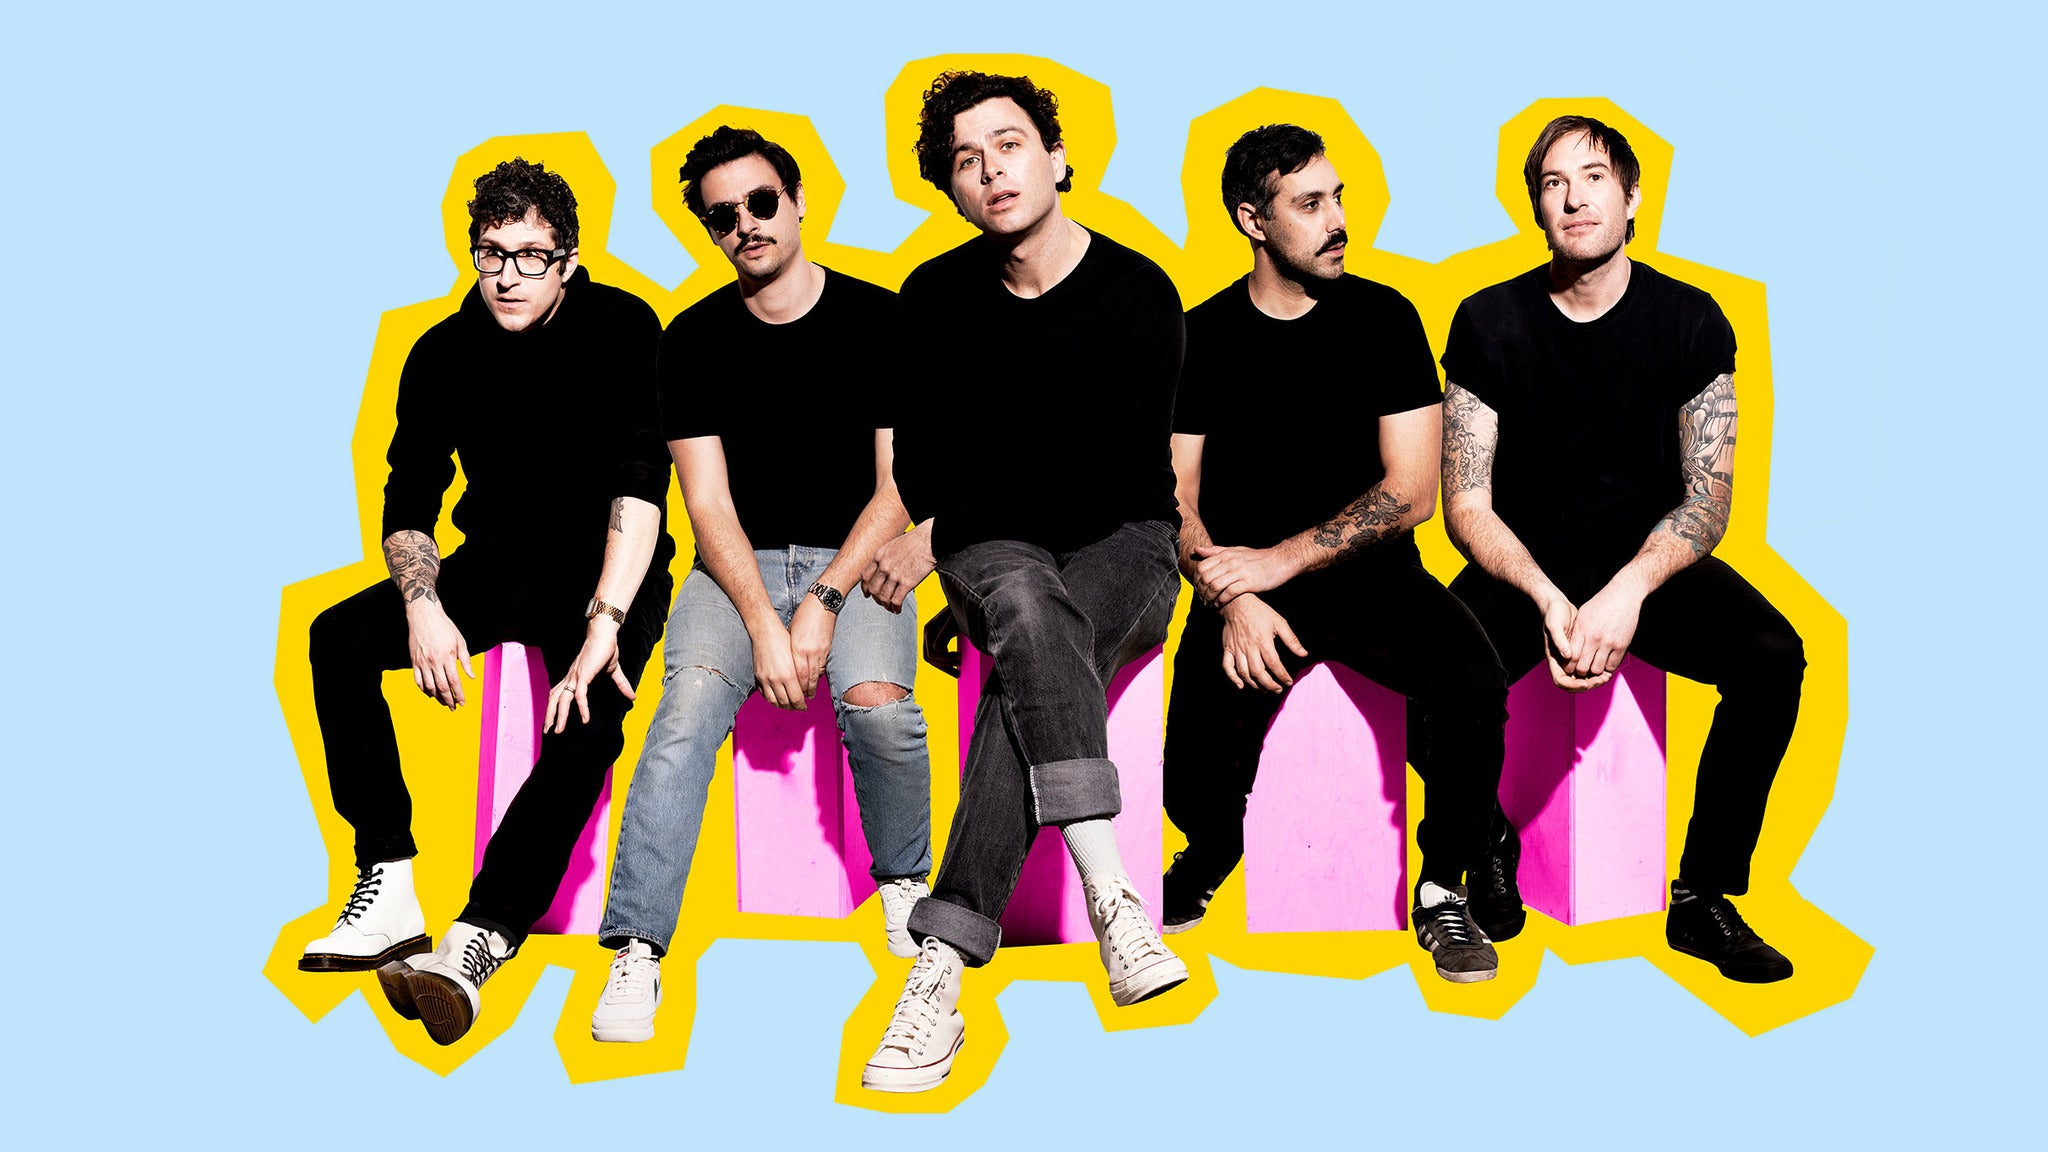 Arkells in Toronto promo photo for "The Rally" presale offer code